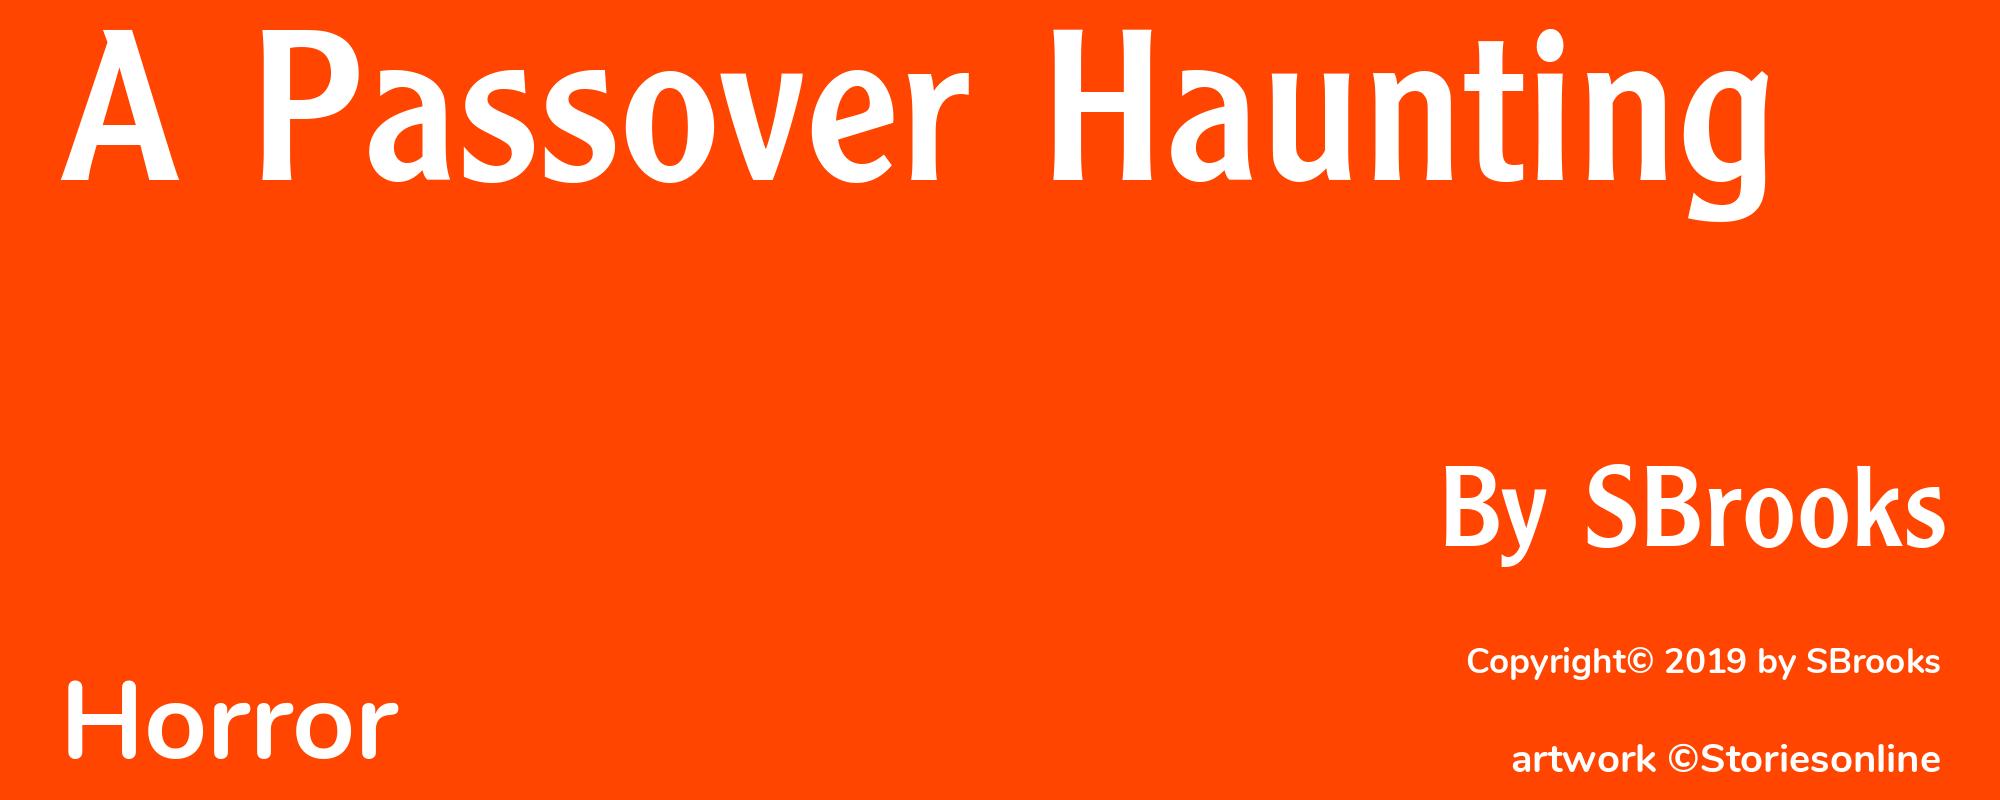 A Passover Haunting - Cover